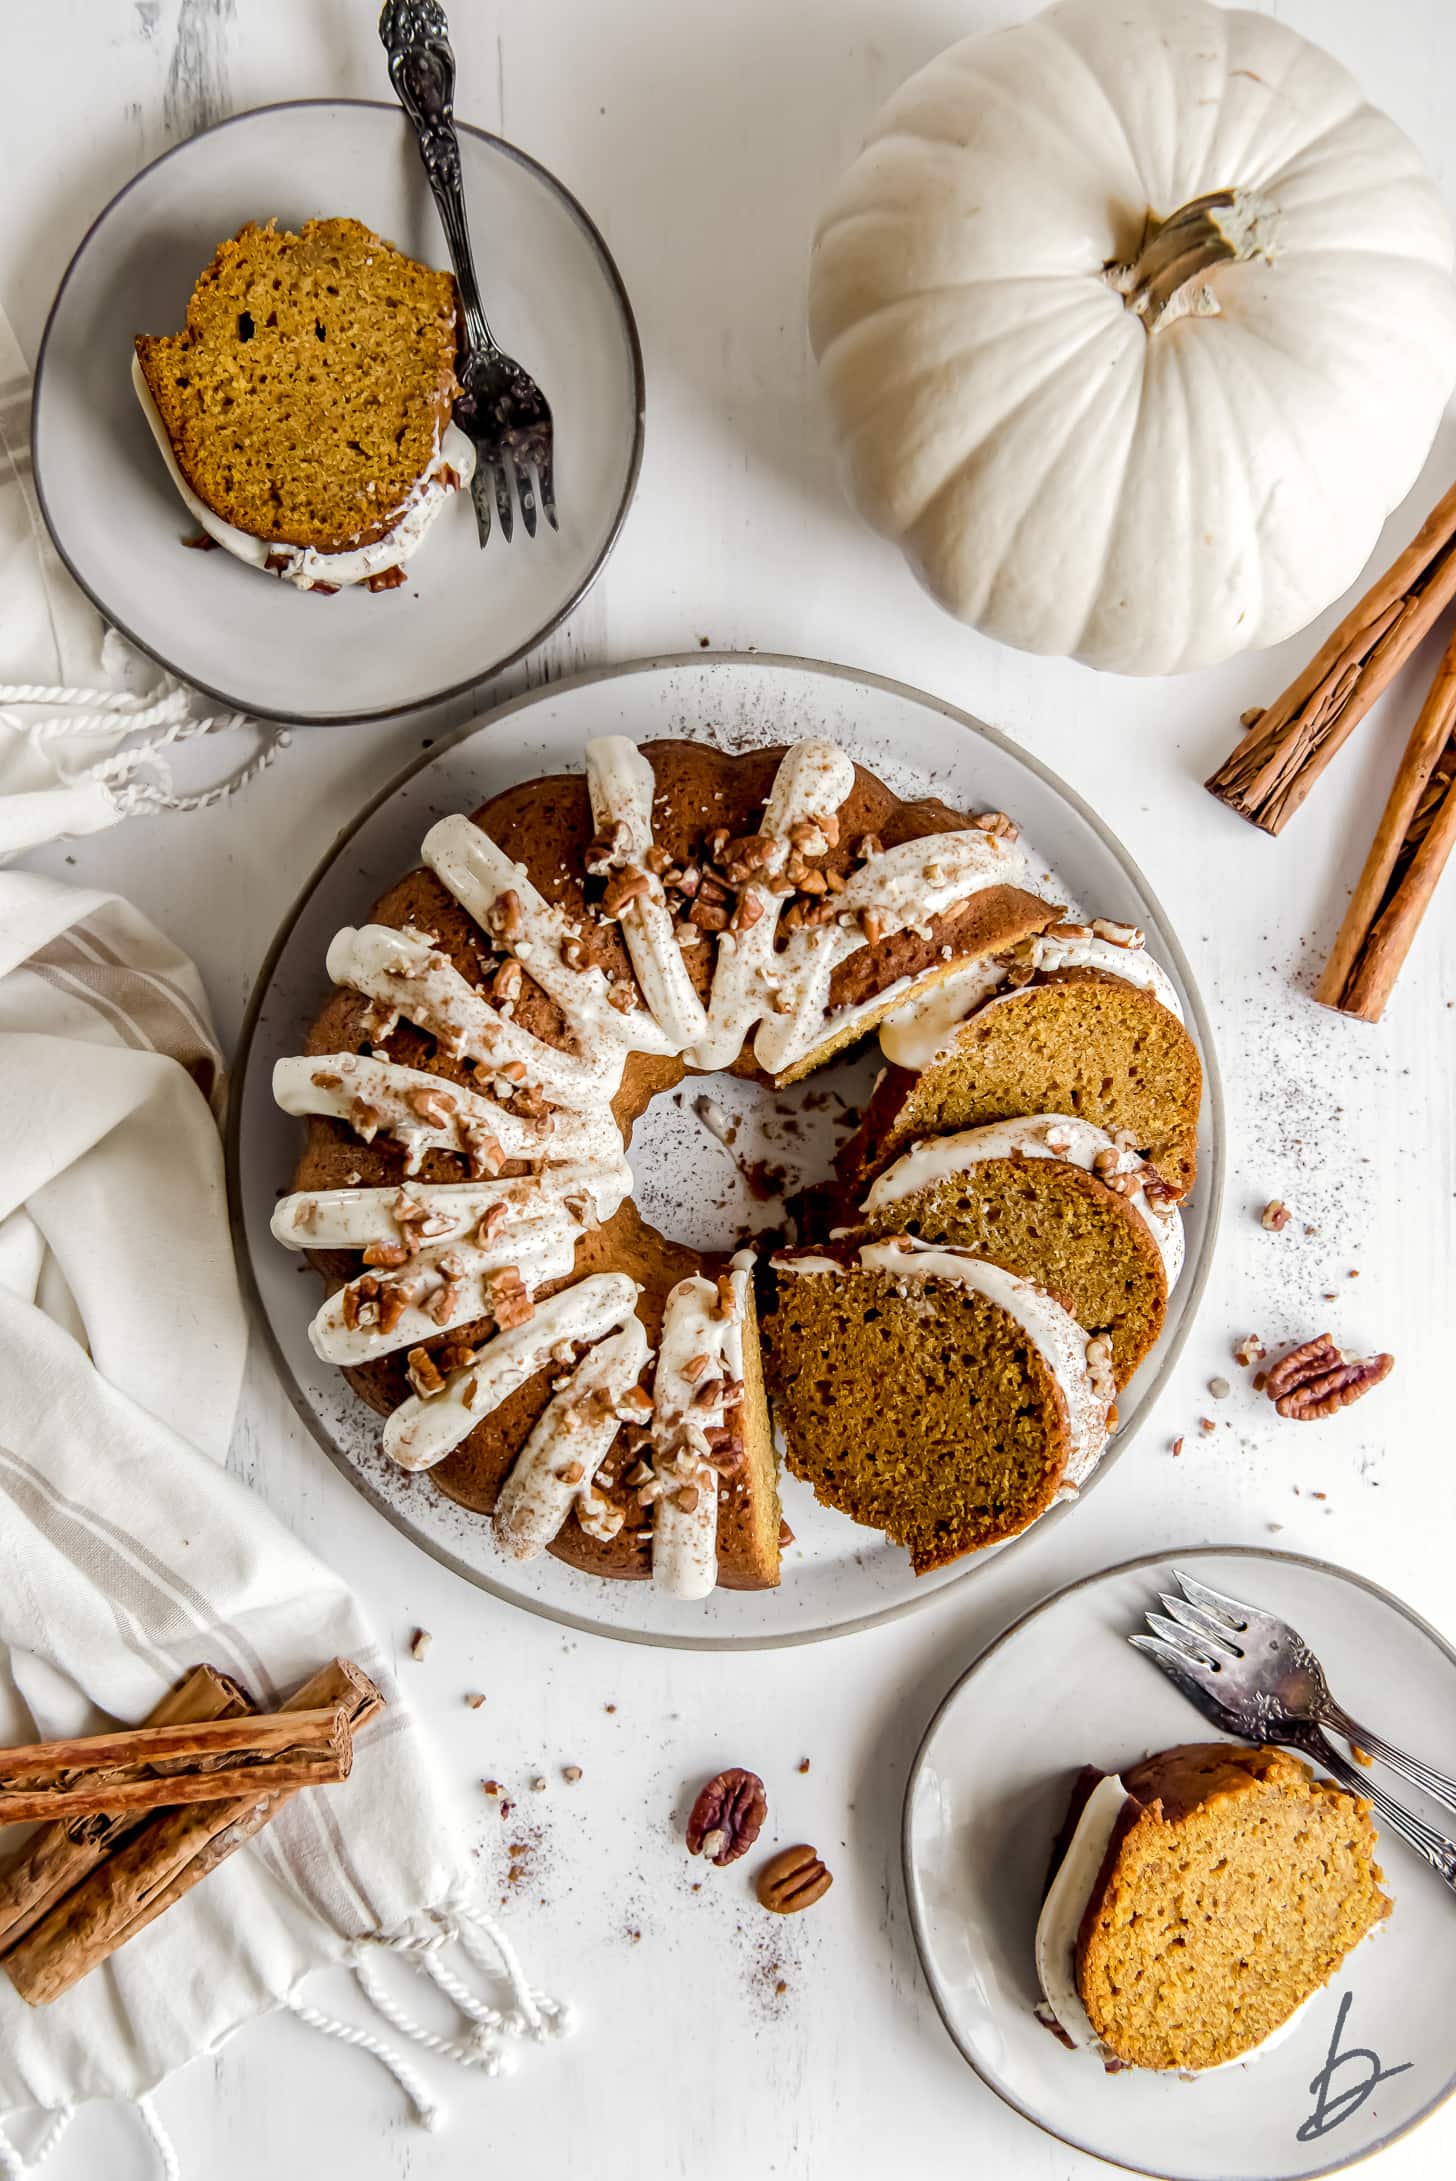 pumpkin bundt cake on plate next to a white pumpkin two smaller plates with cake slices